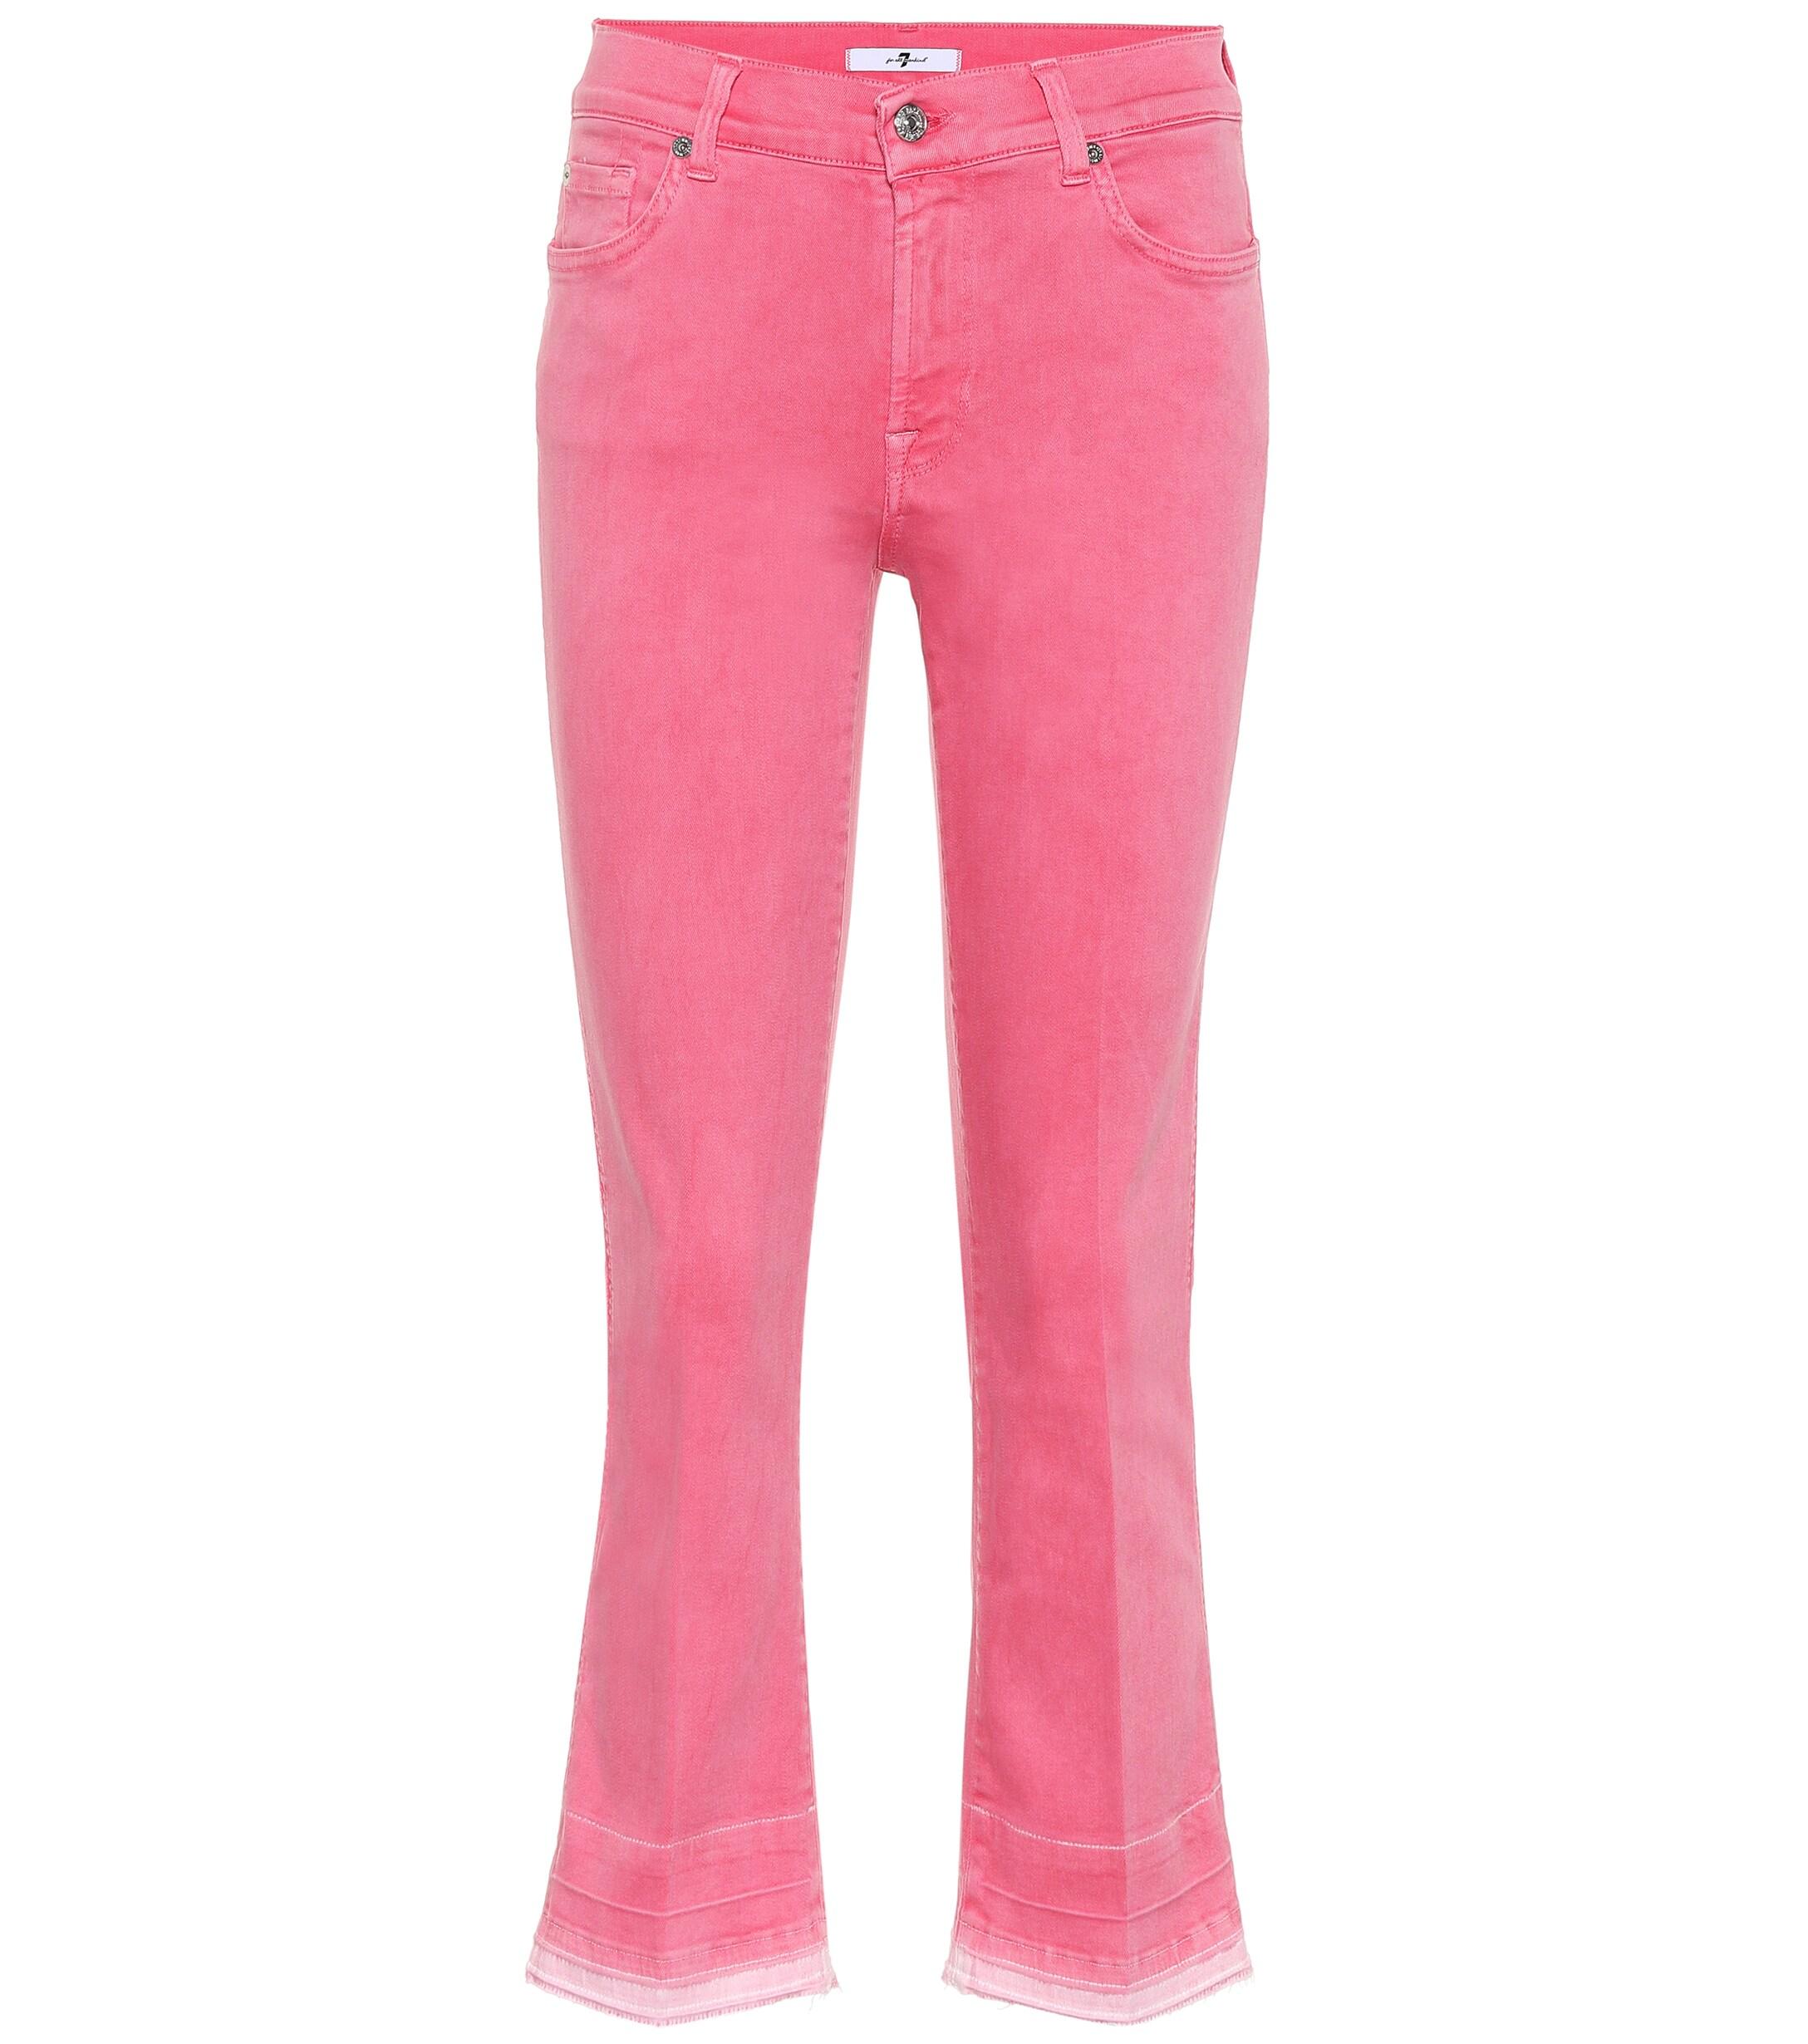 7 For All Mankind Denim Cropped Mid-rise Bootcut Jeans in Pink - Lyst